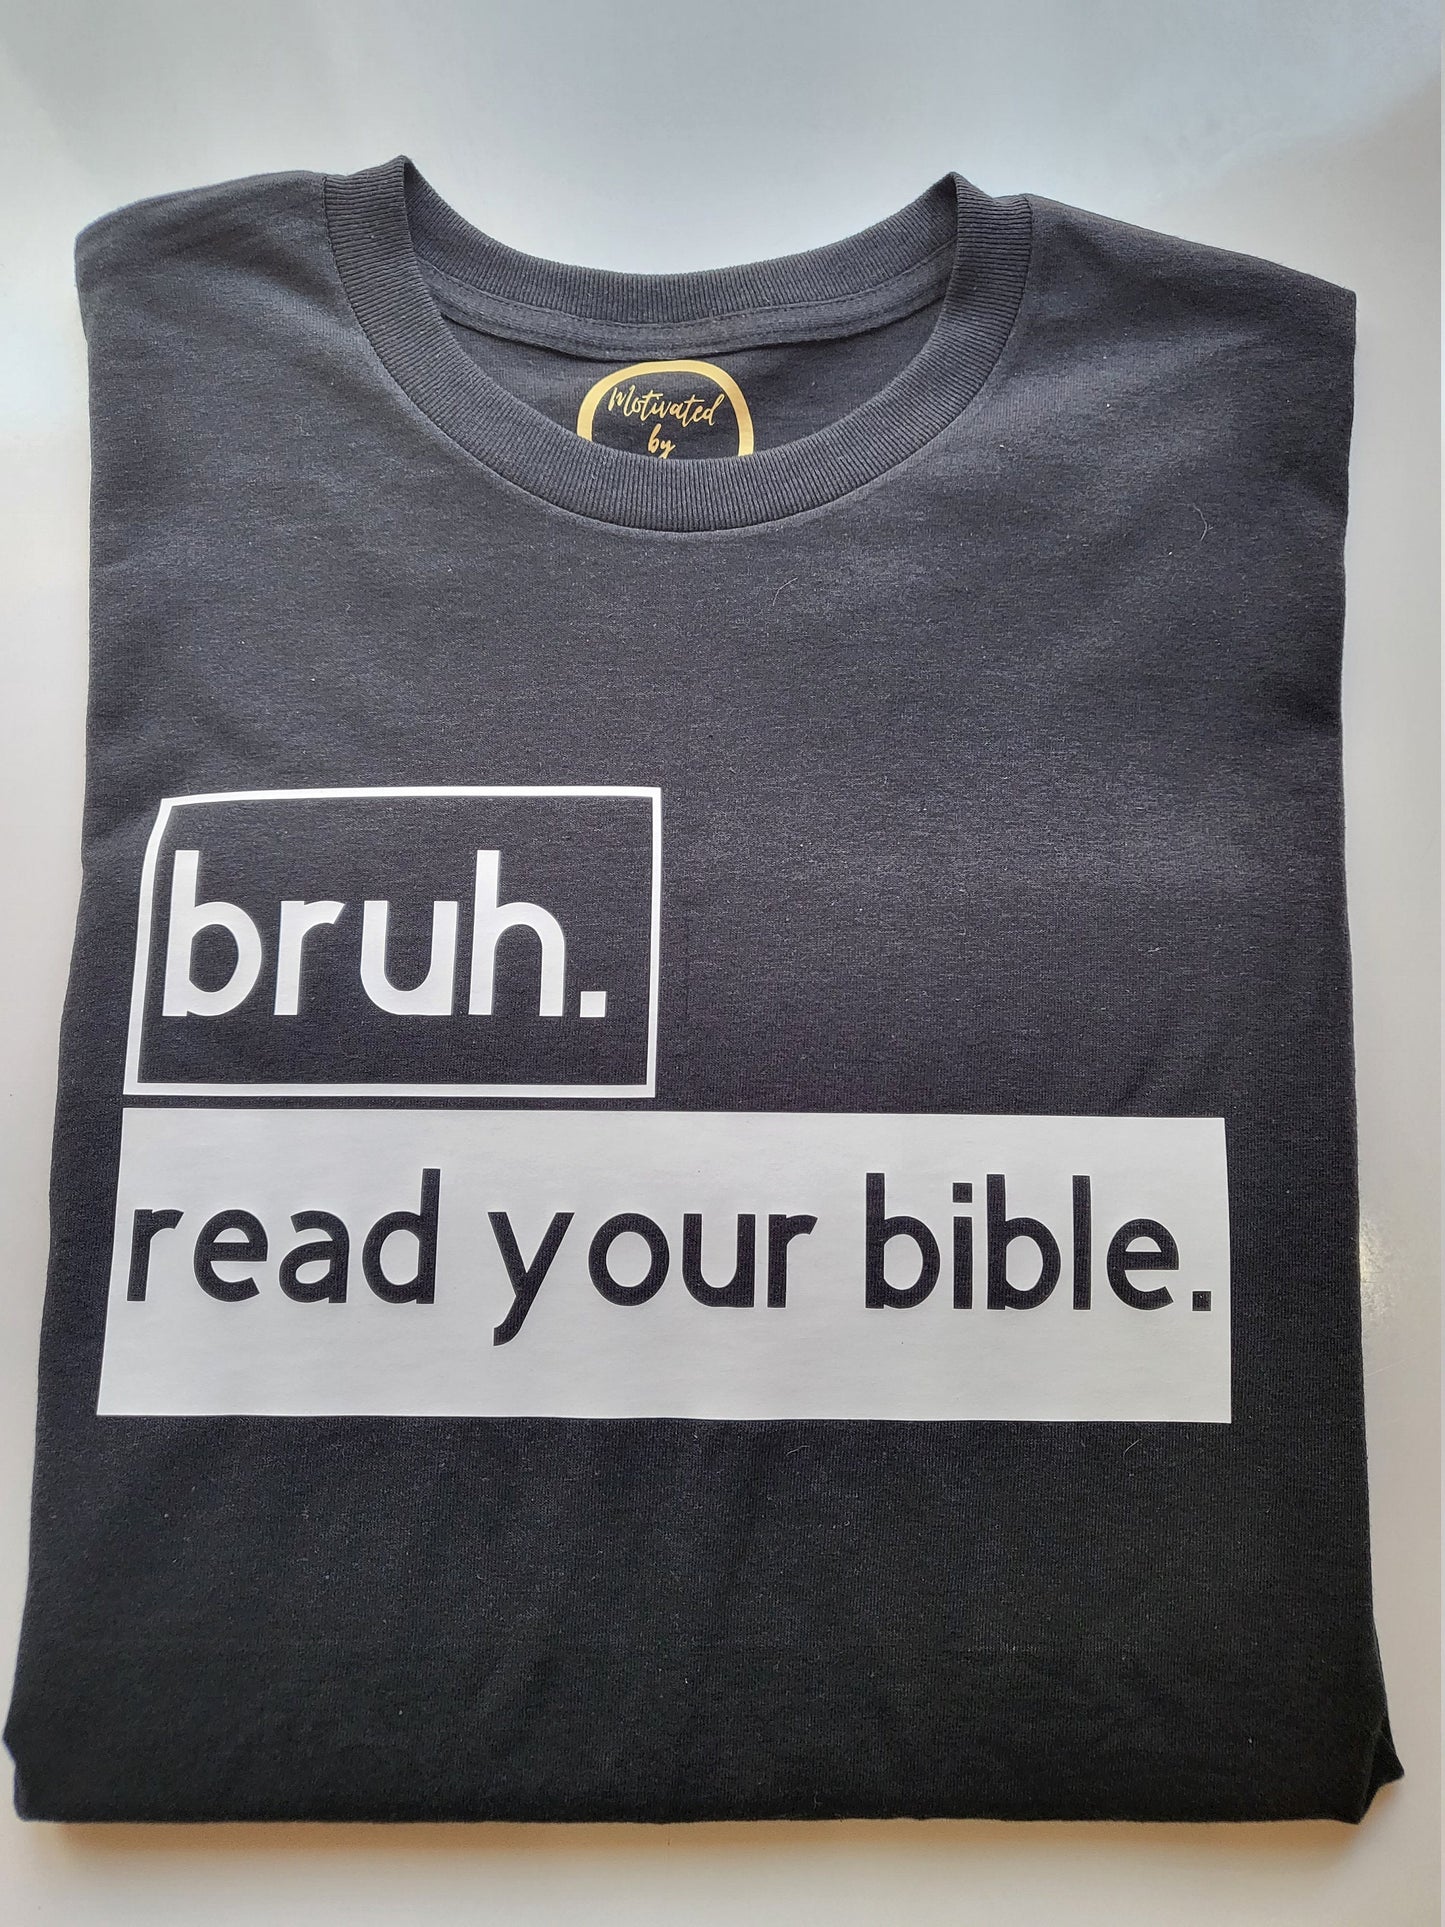 bruh. read your bible.